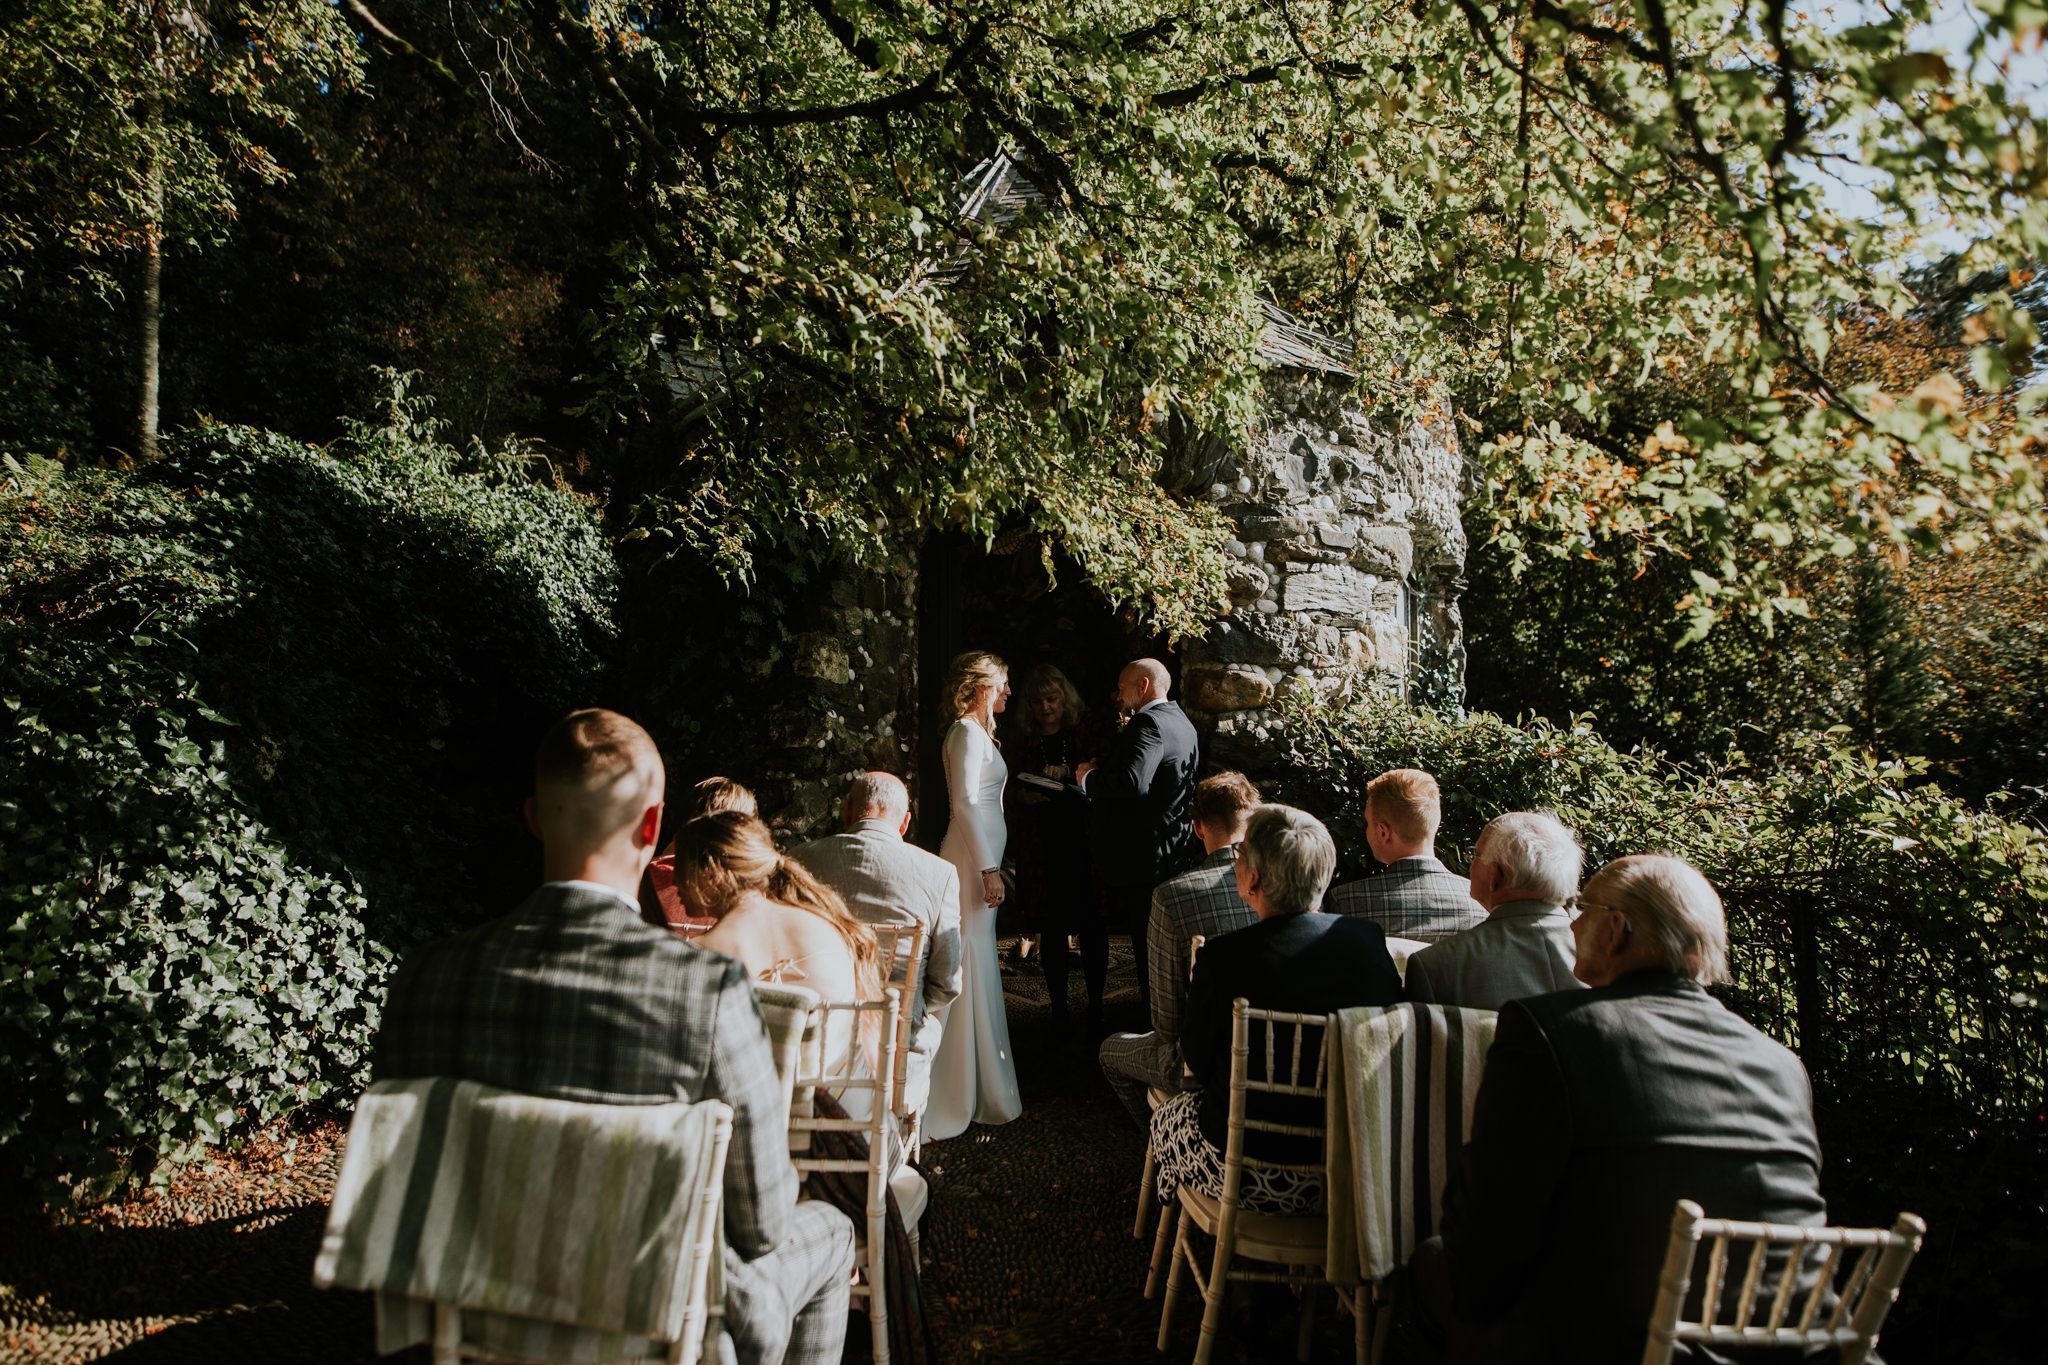 Intimate elopement ceremony at Hotel Endlseigh